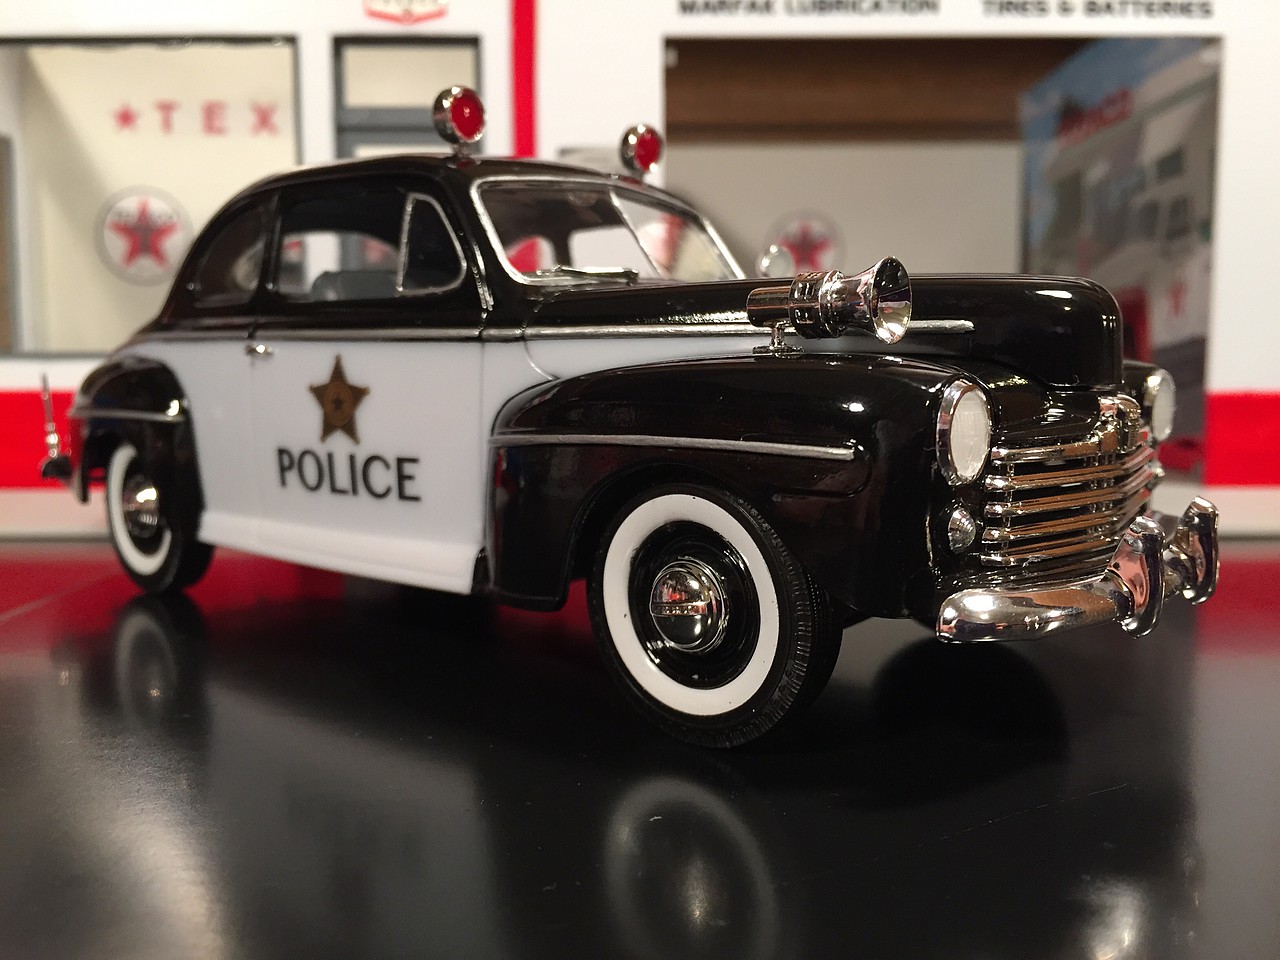 Revell 48 Ford Police Coupe 2 N 1 Modle Kit for sale online 